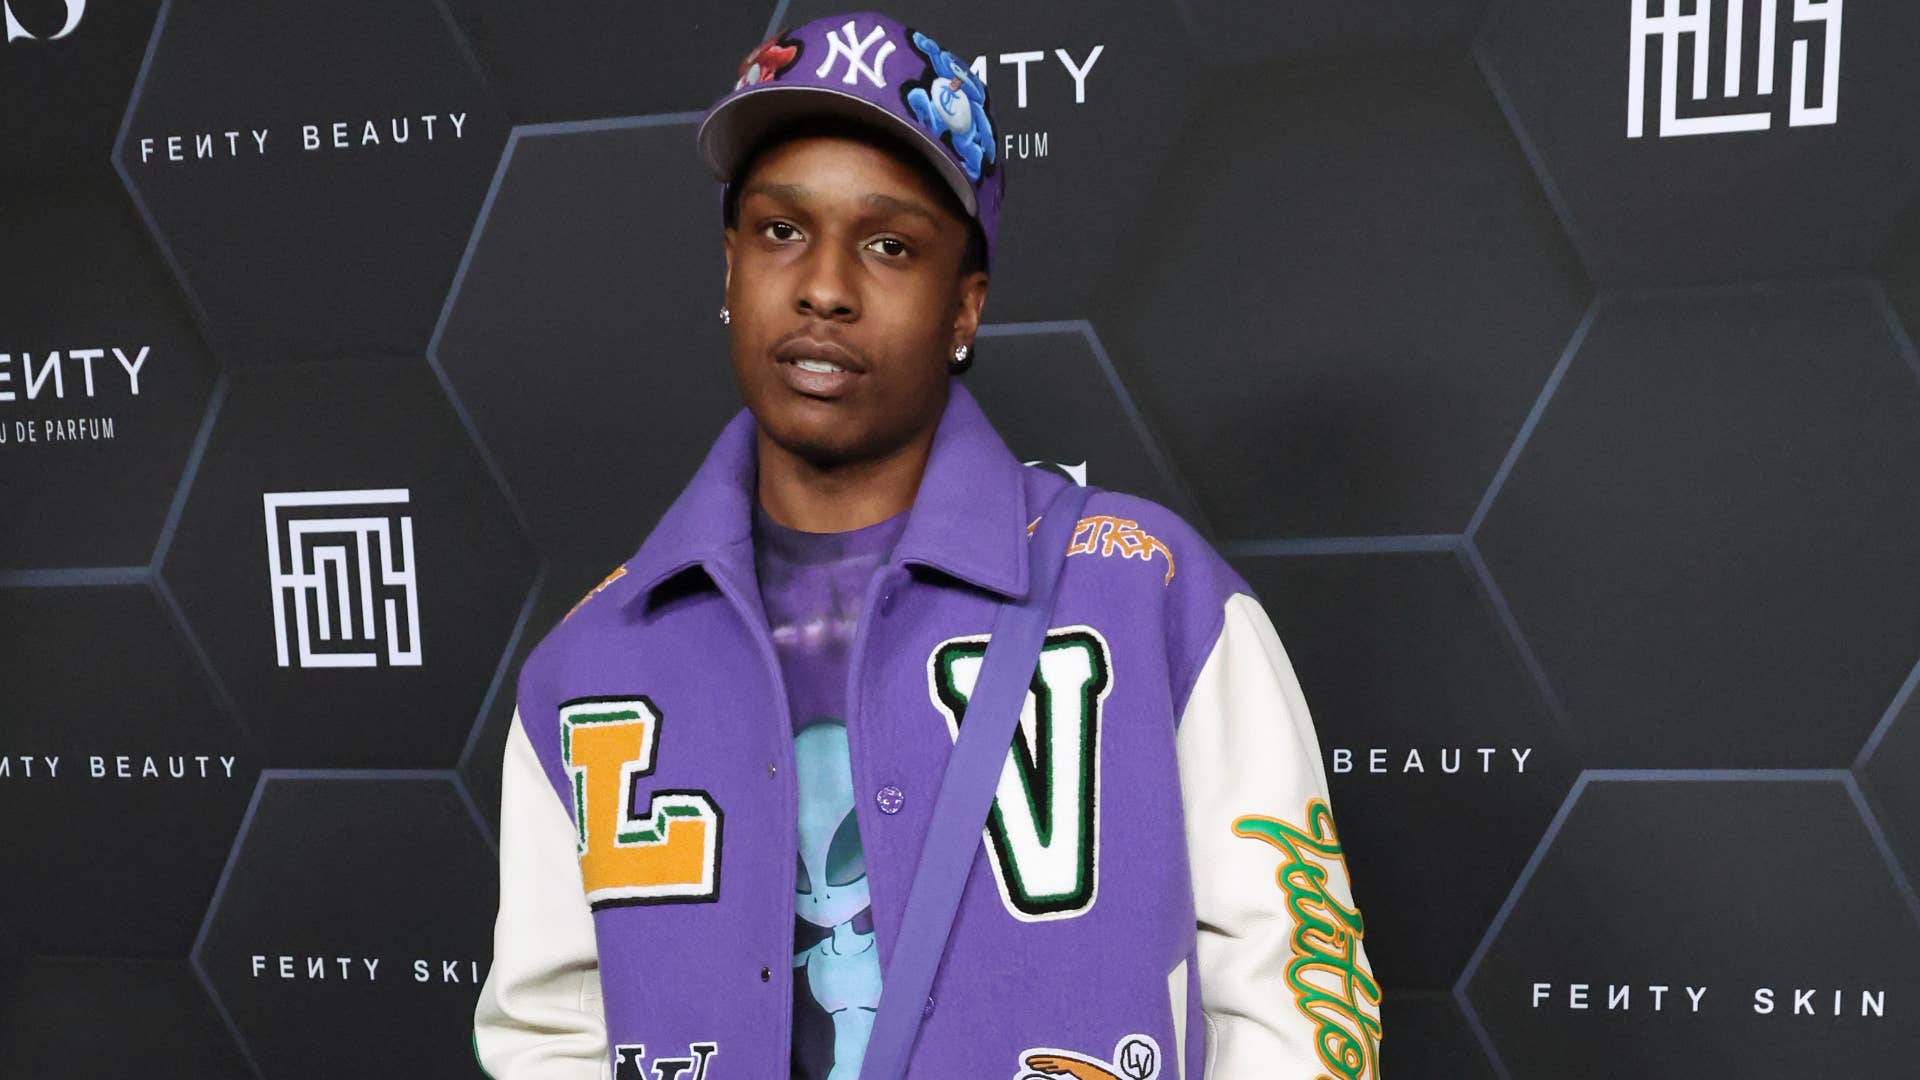 ASAP Rocky is seen on a red carpet